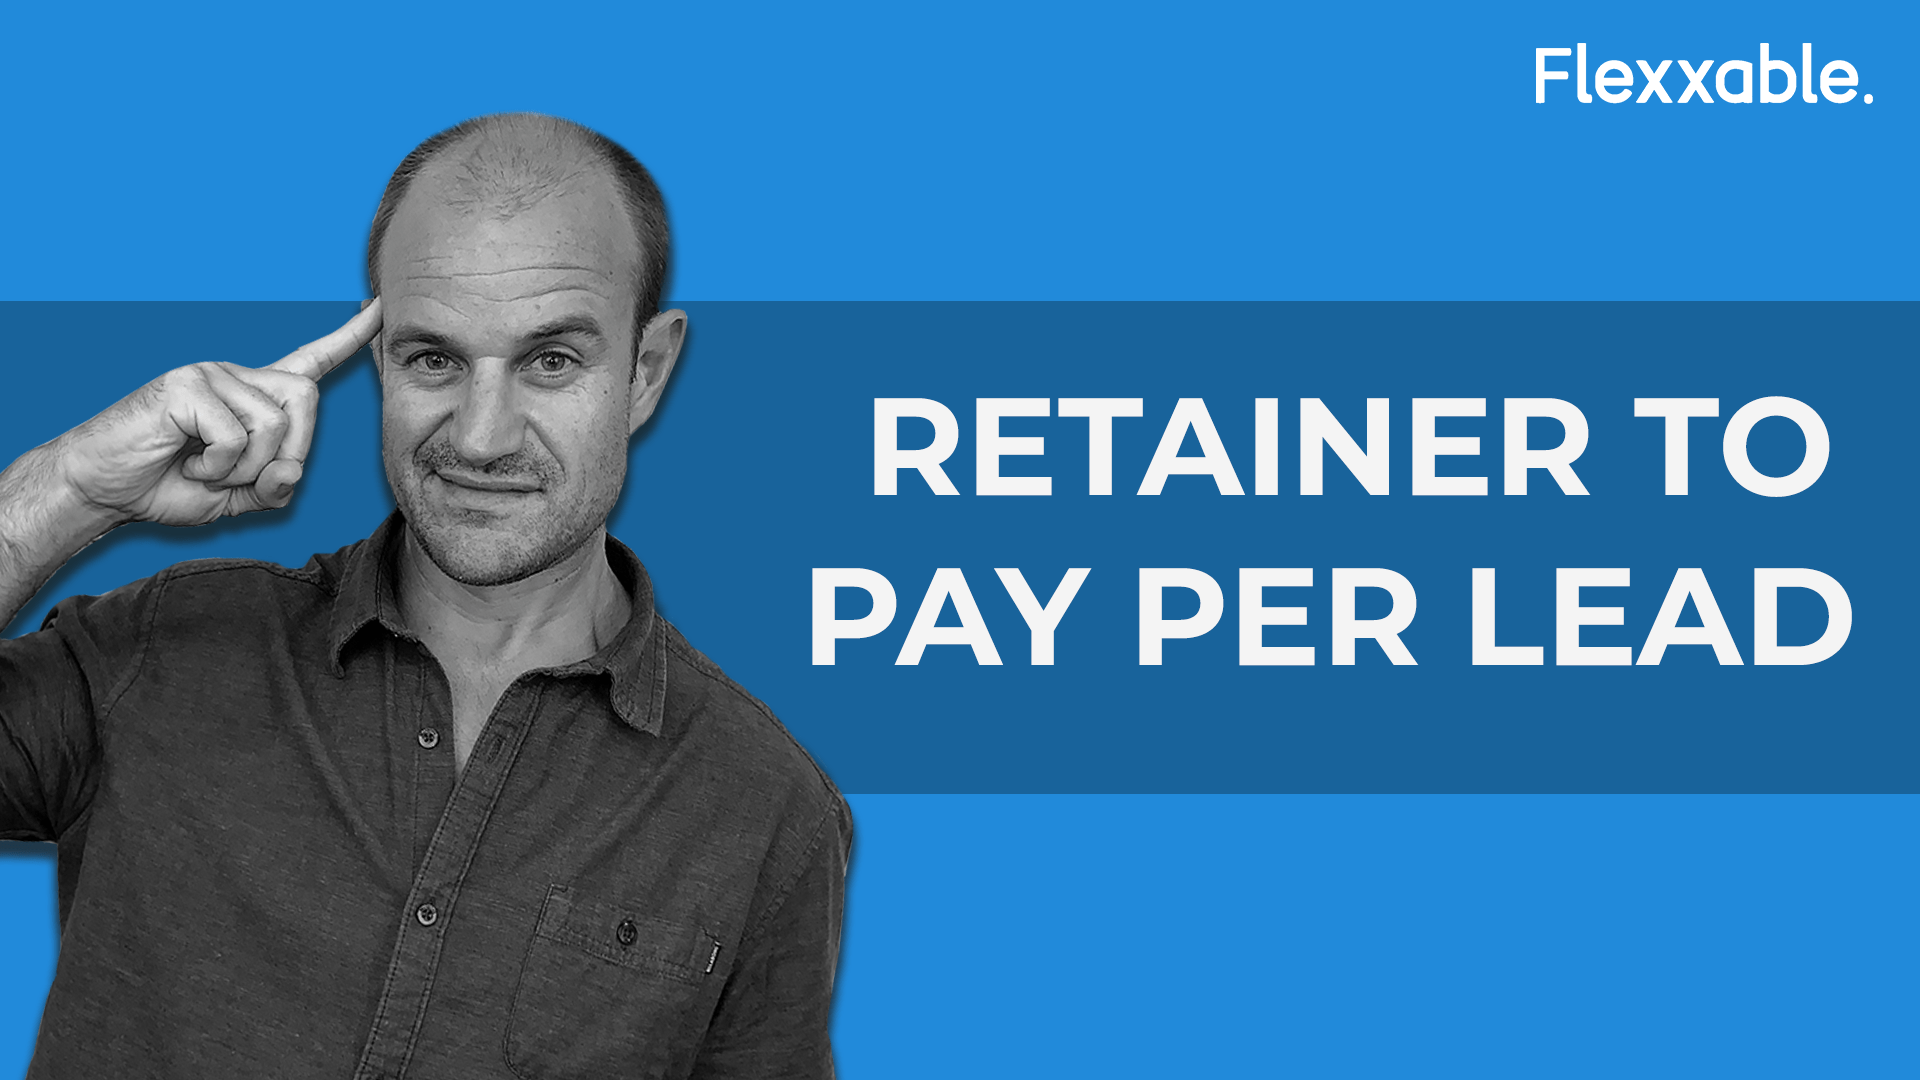 Retainer to pay per lead